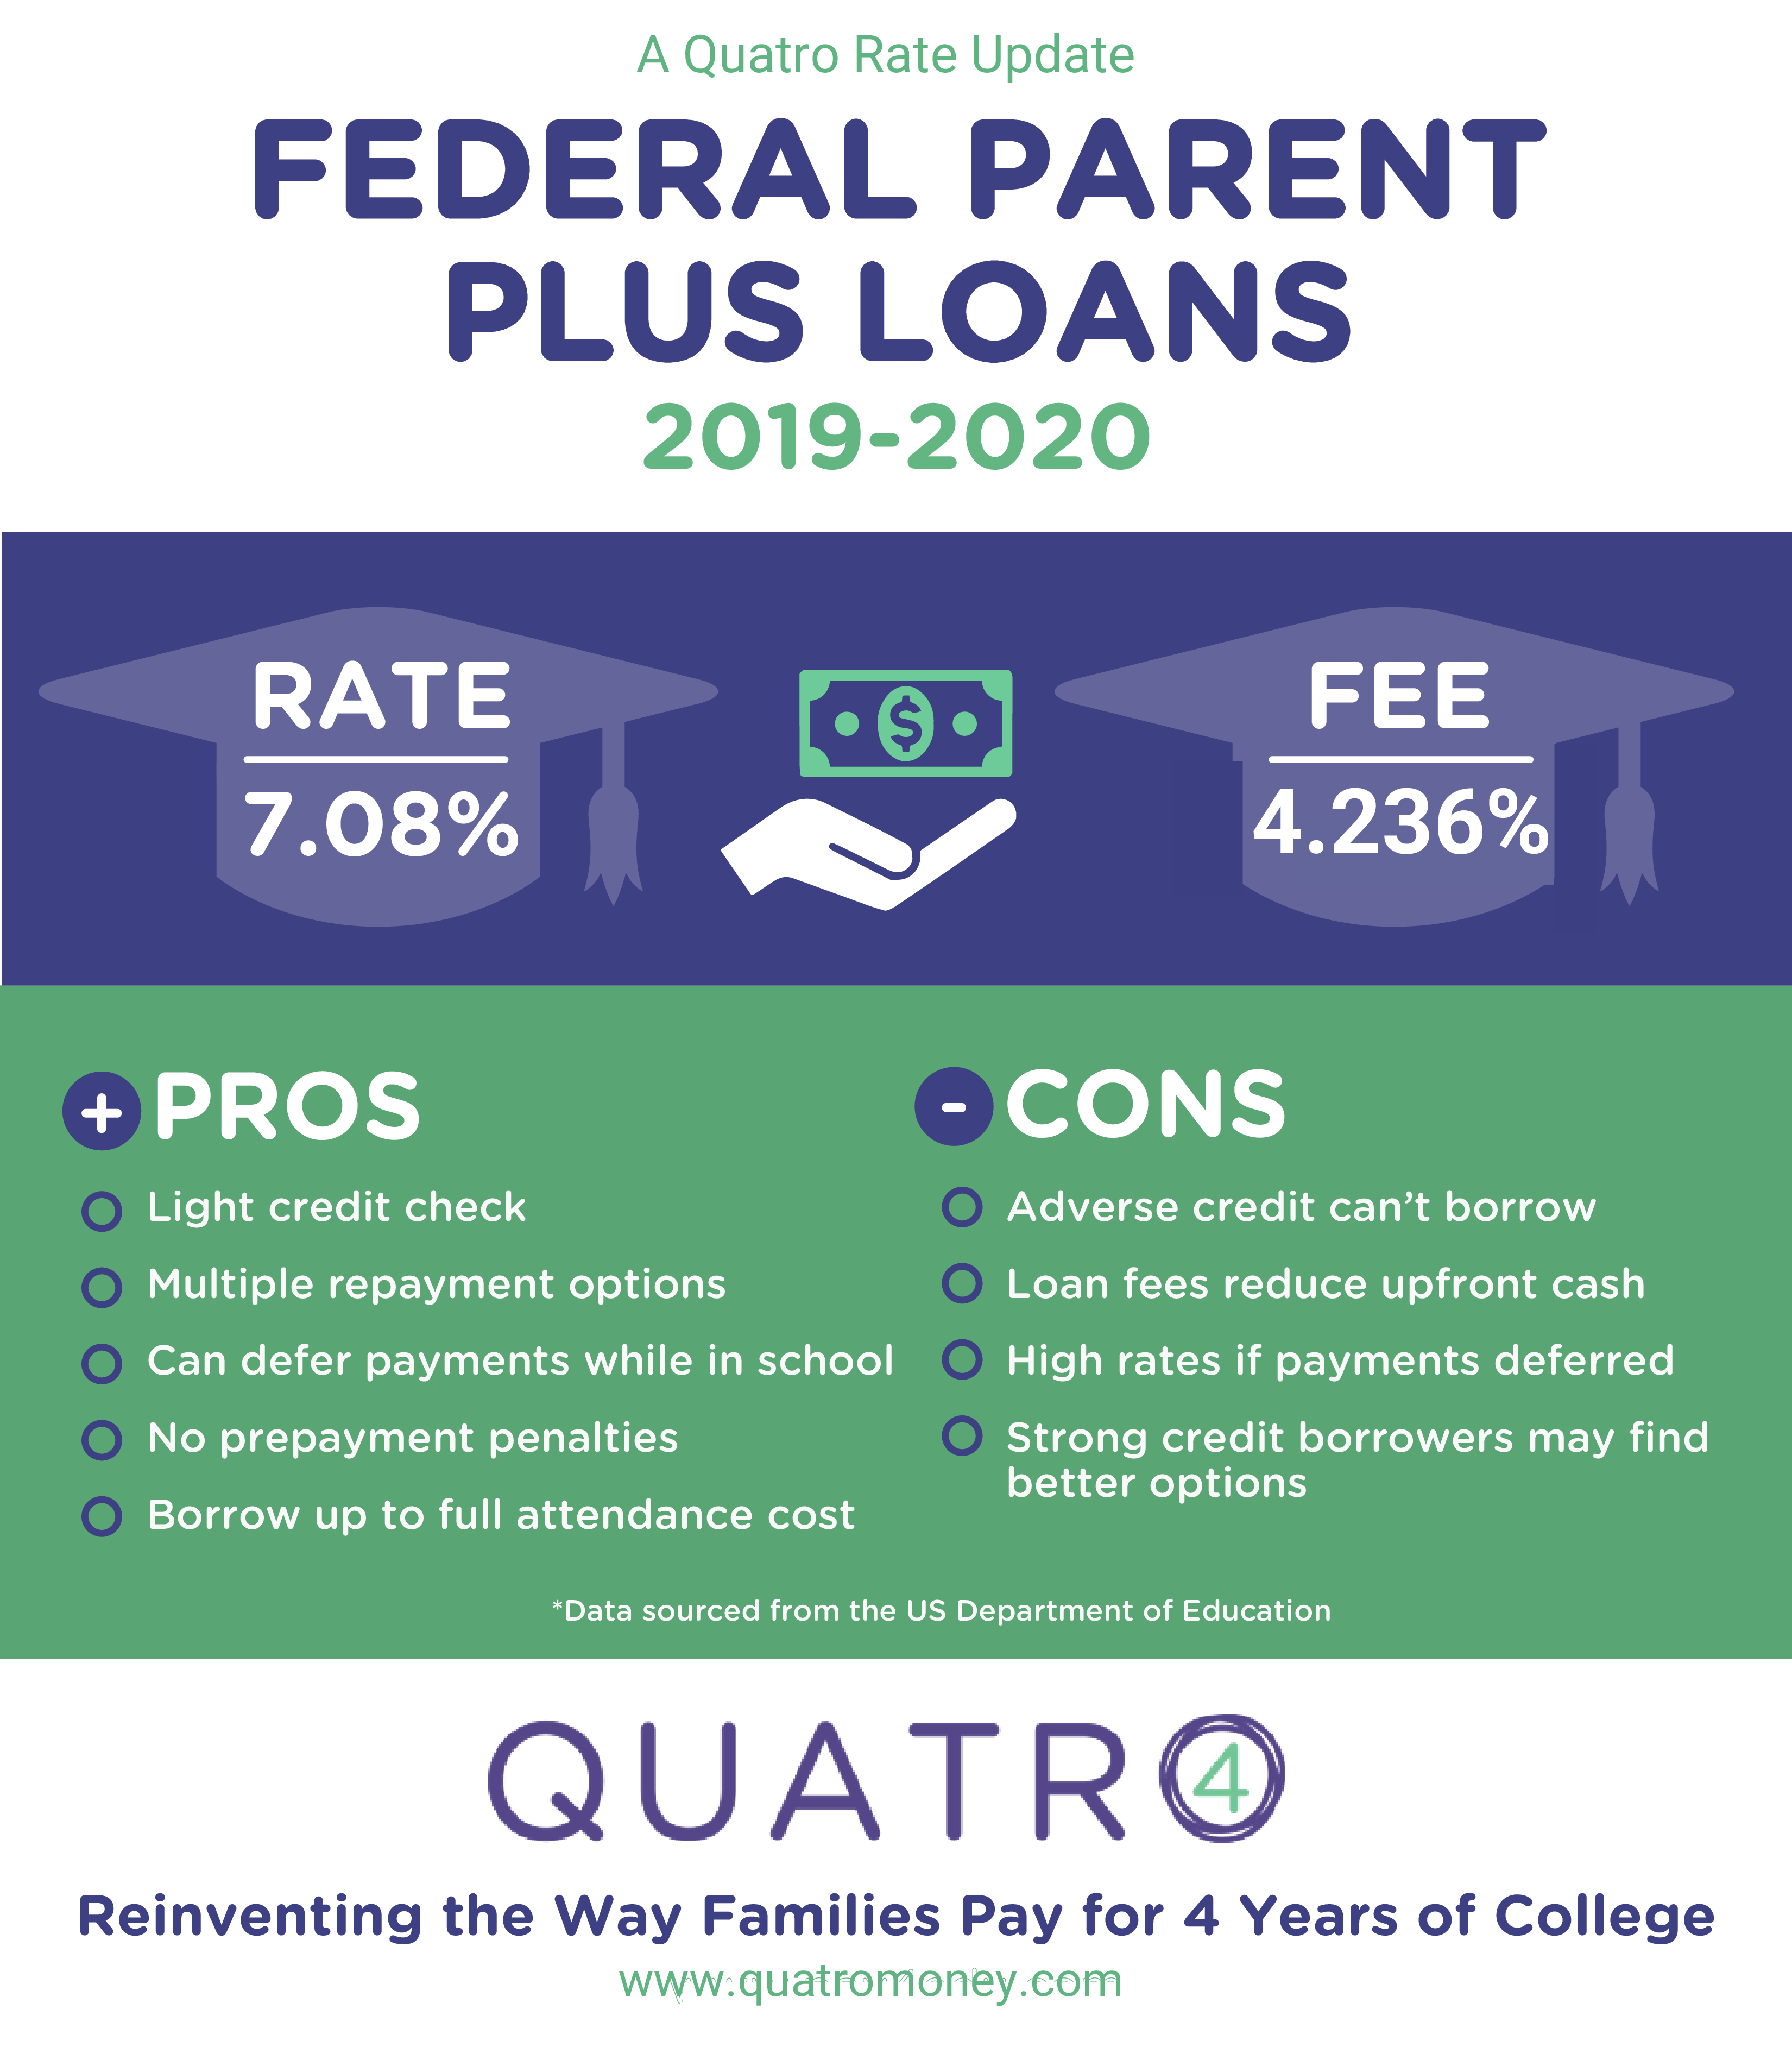 New Lower Federal Parent PLUS Loan Interest Rate for 2019